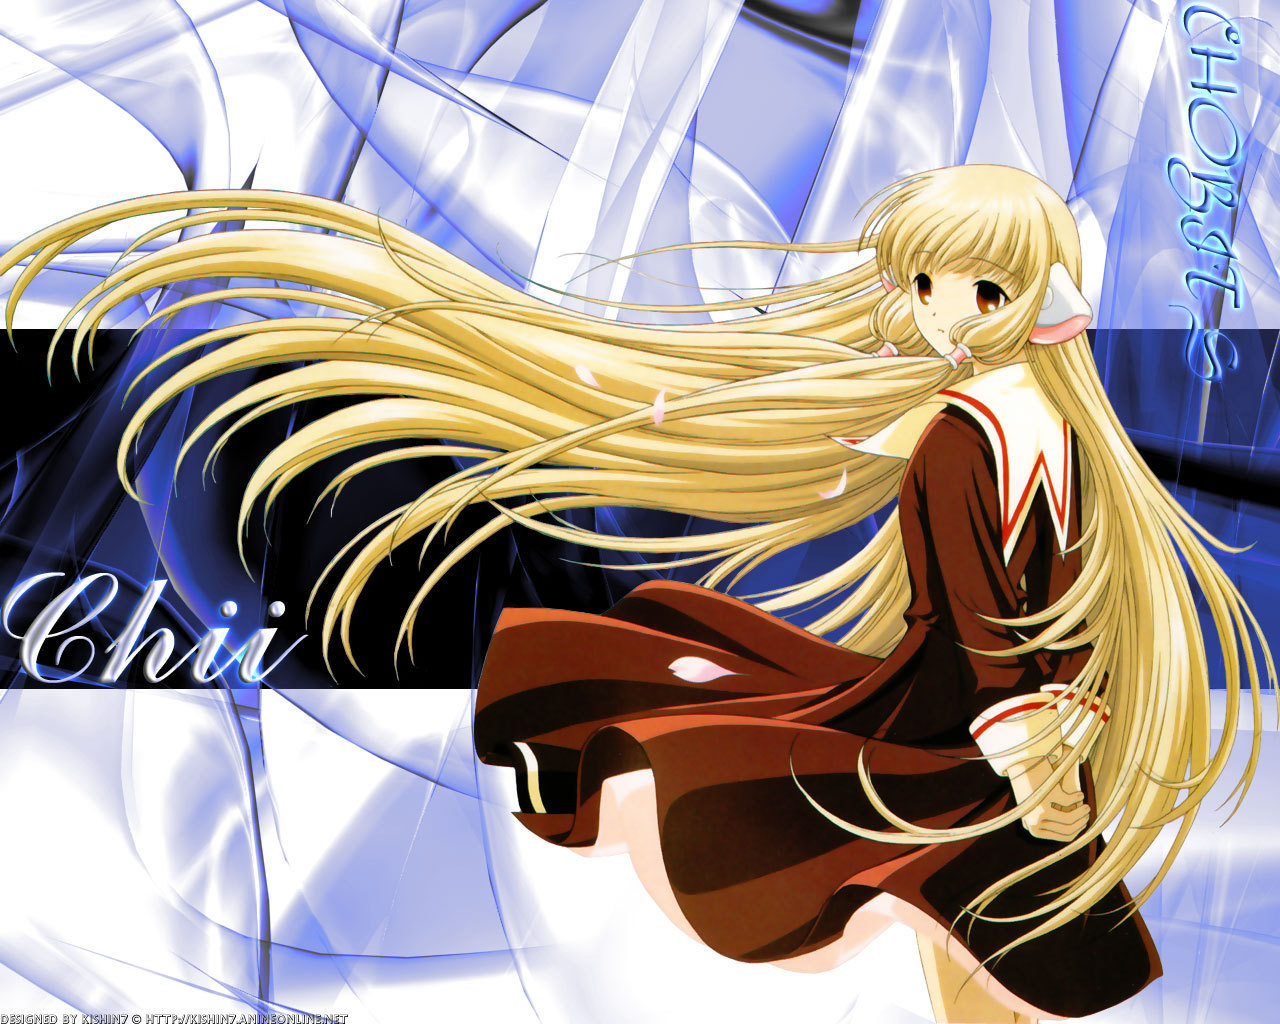 Chobits Image Chii HD Wallpaper And Background Photos